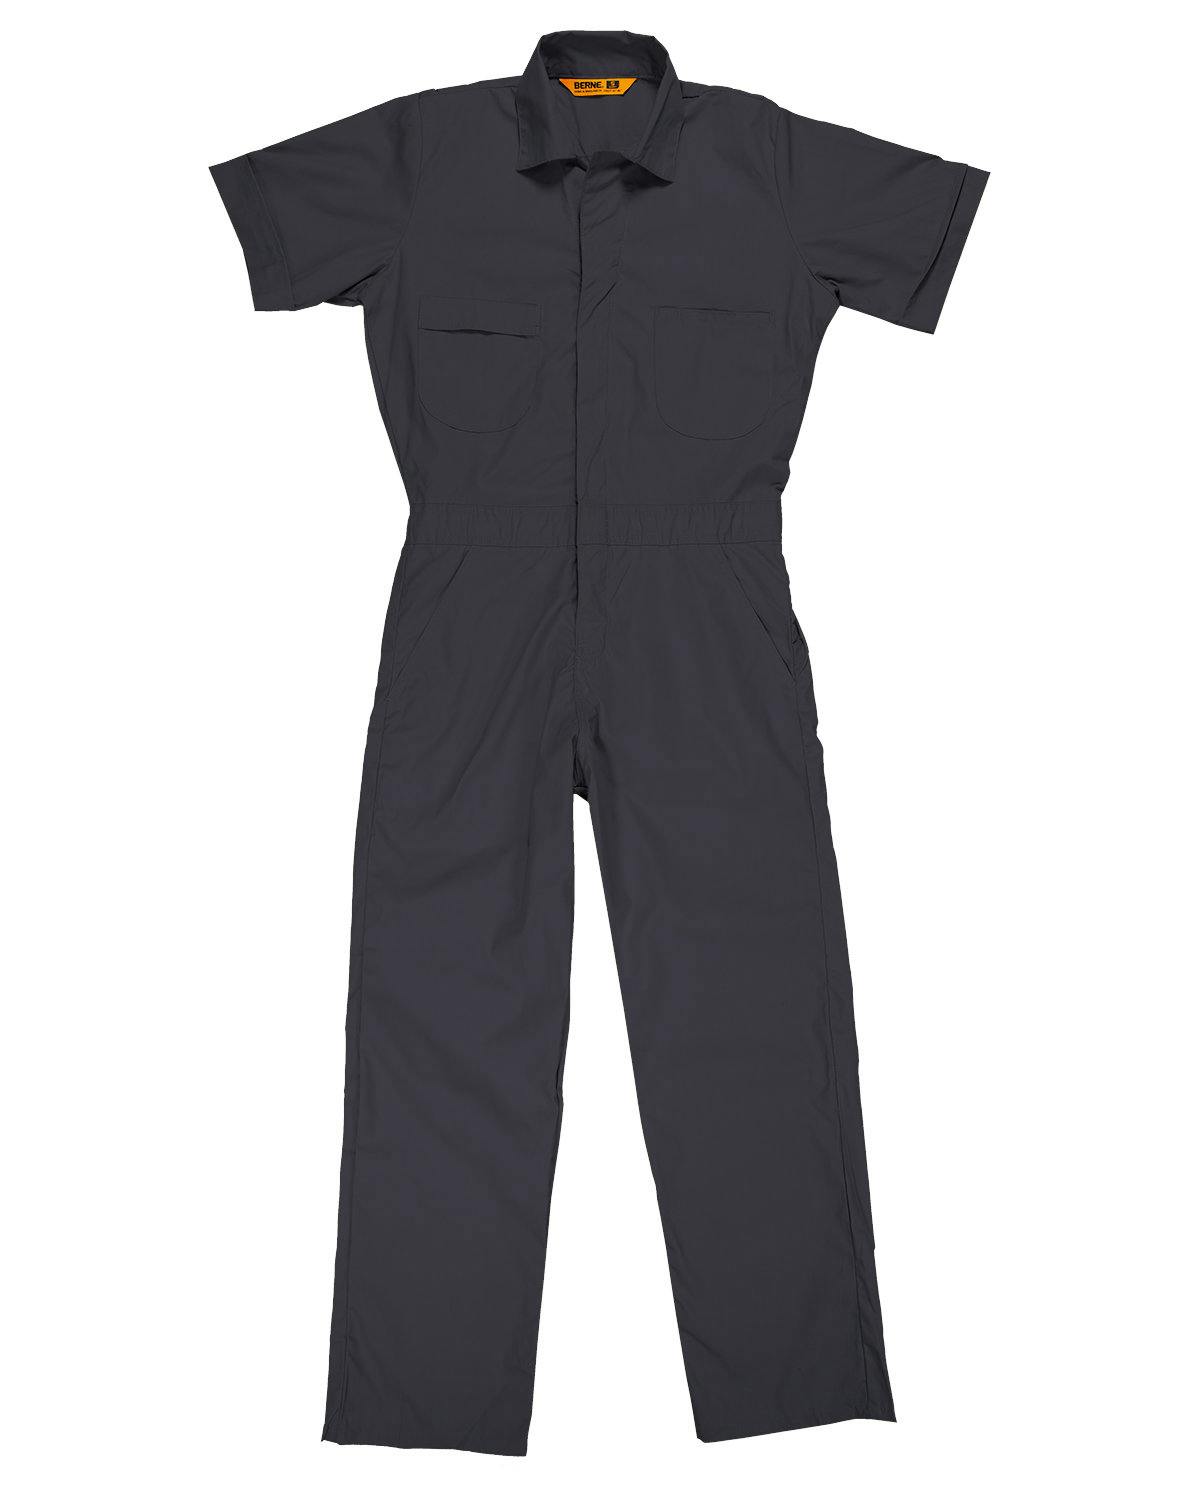 Image for Men's Axle Short Sleeve Coverall